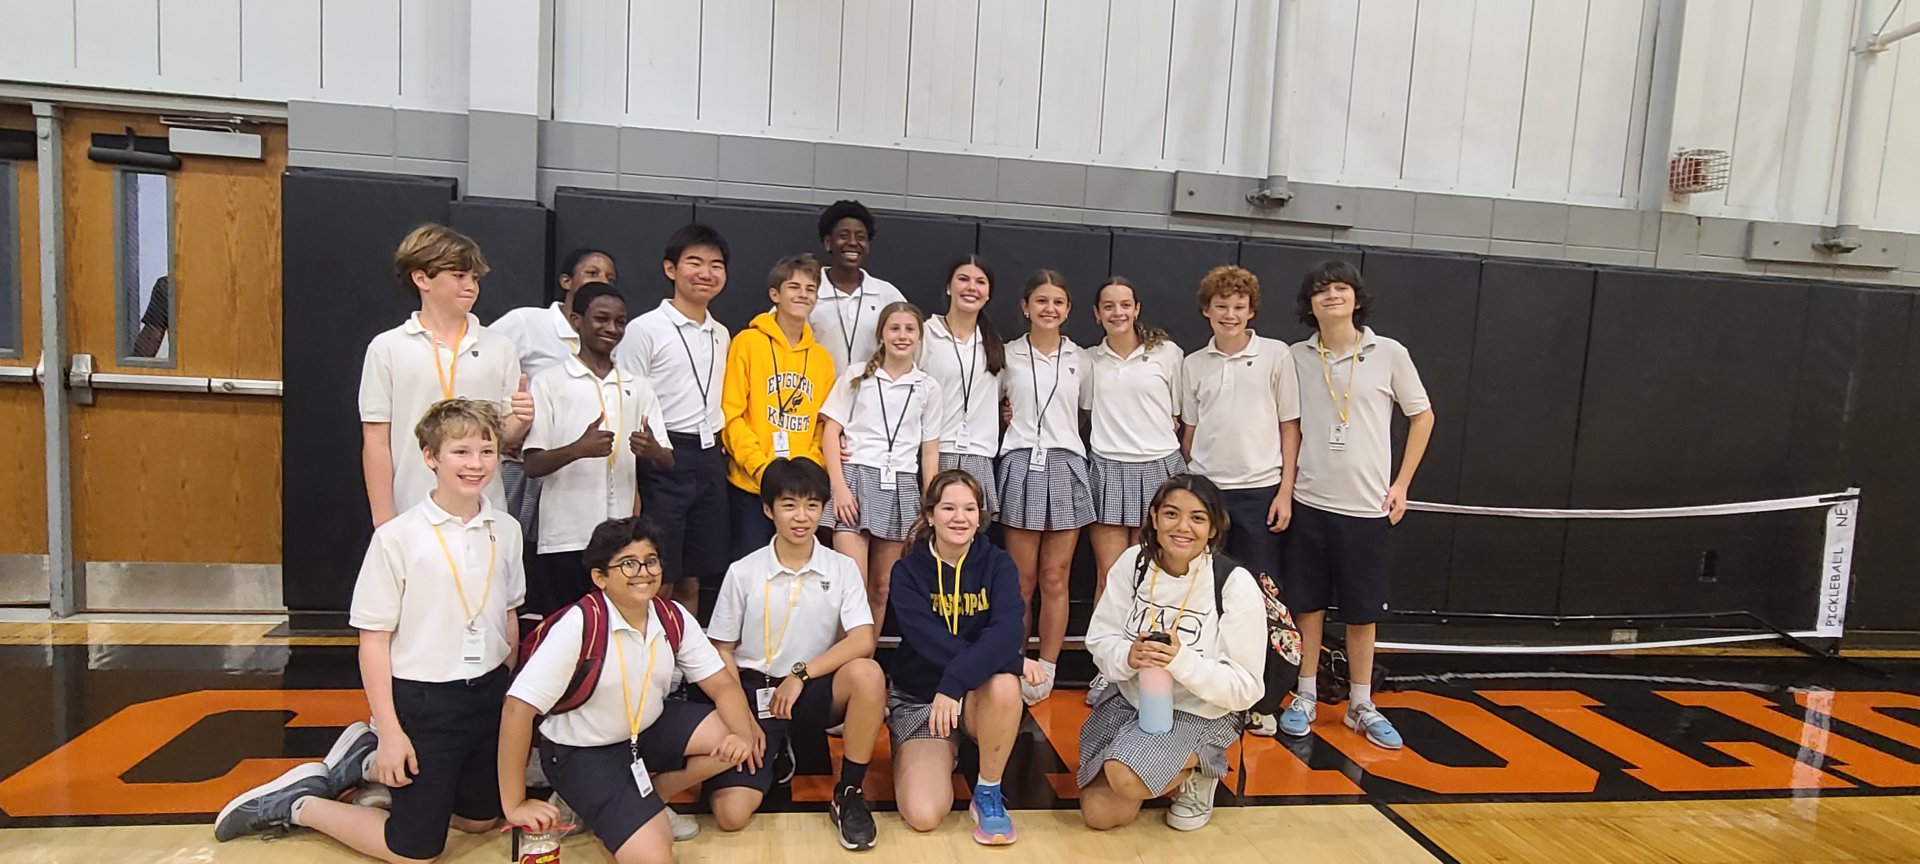 Middle School math team at tournament